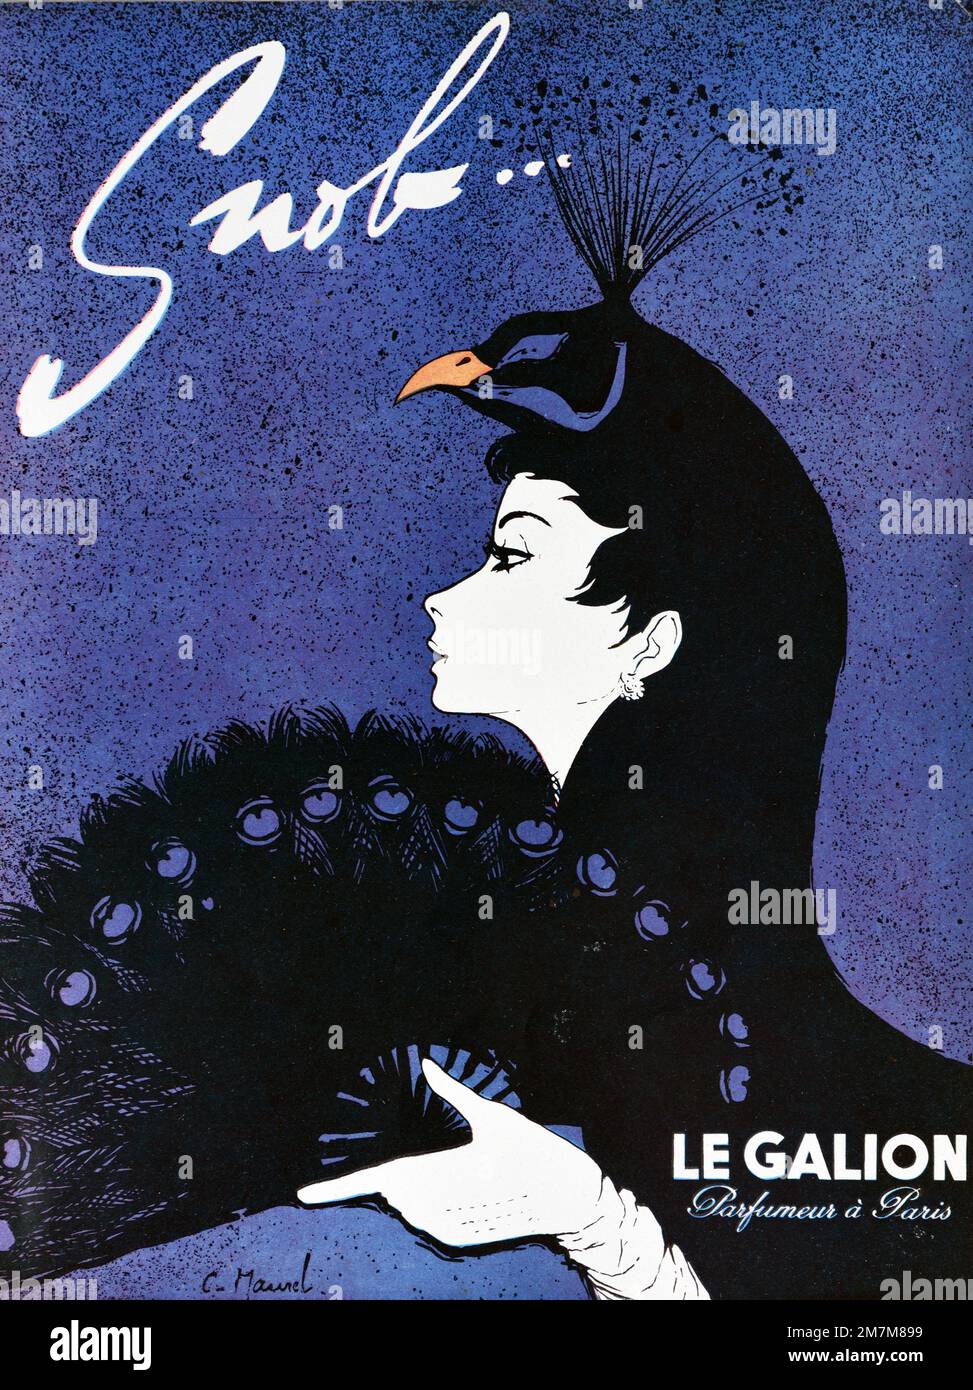 Vintage or Old Advert, Advertisement, Publicity or Illustration for Snob Perfume from Le Galion 1956. Illustrated with Imge of Young Woman in Peacock Costume and Hand Fan Stock Photo